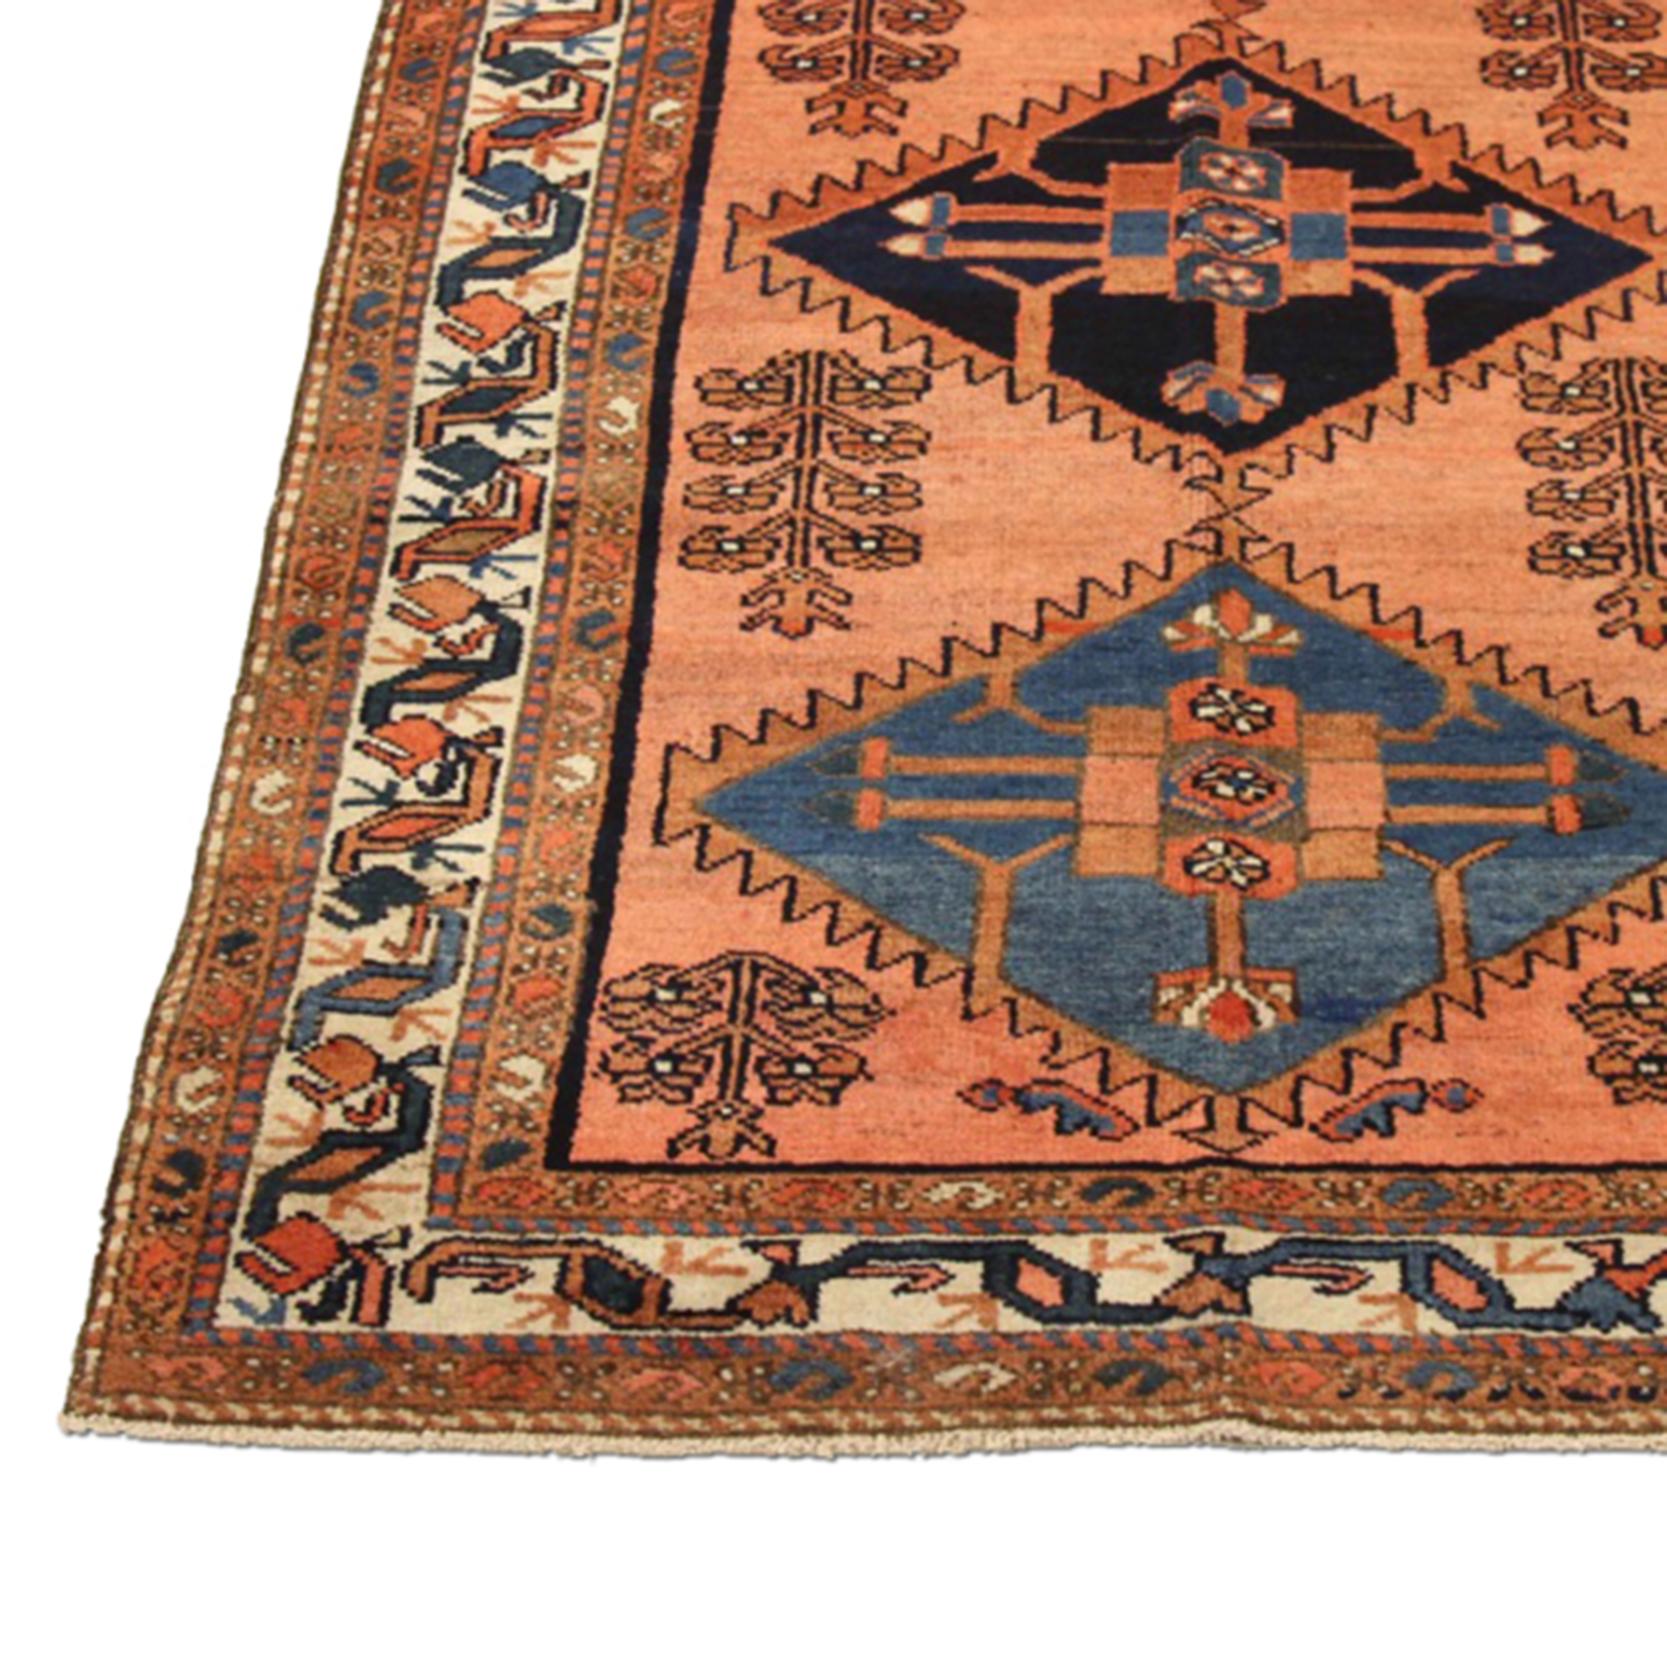 Antique Persian runner rug handwoven from the finest sheep’s wool and colored with all-natural vegetable dyes that are safe for humans and pets. It’s a traditional Malayer design featuring three large diamond central medallions over a pink center